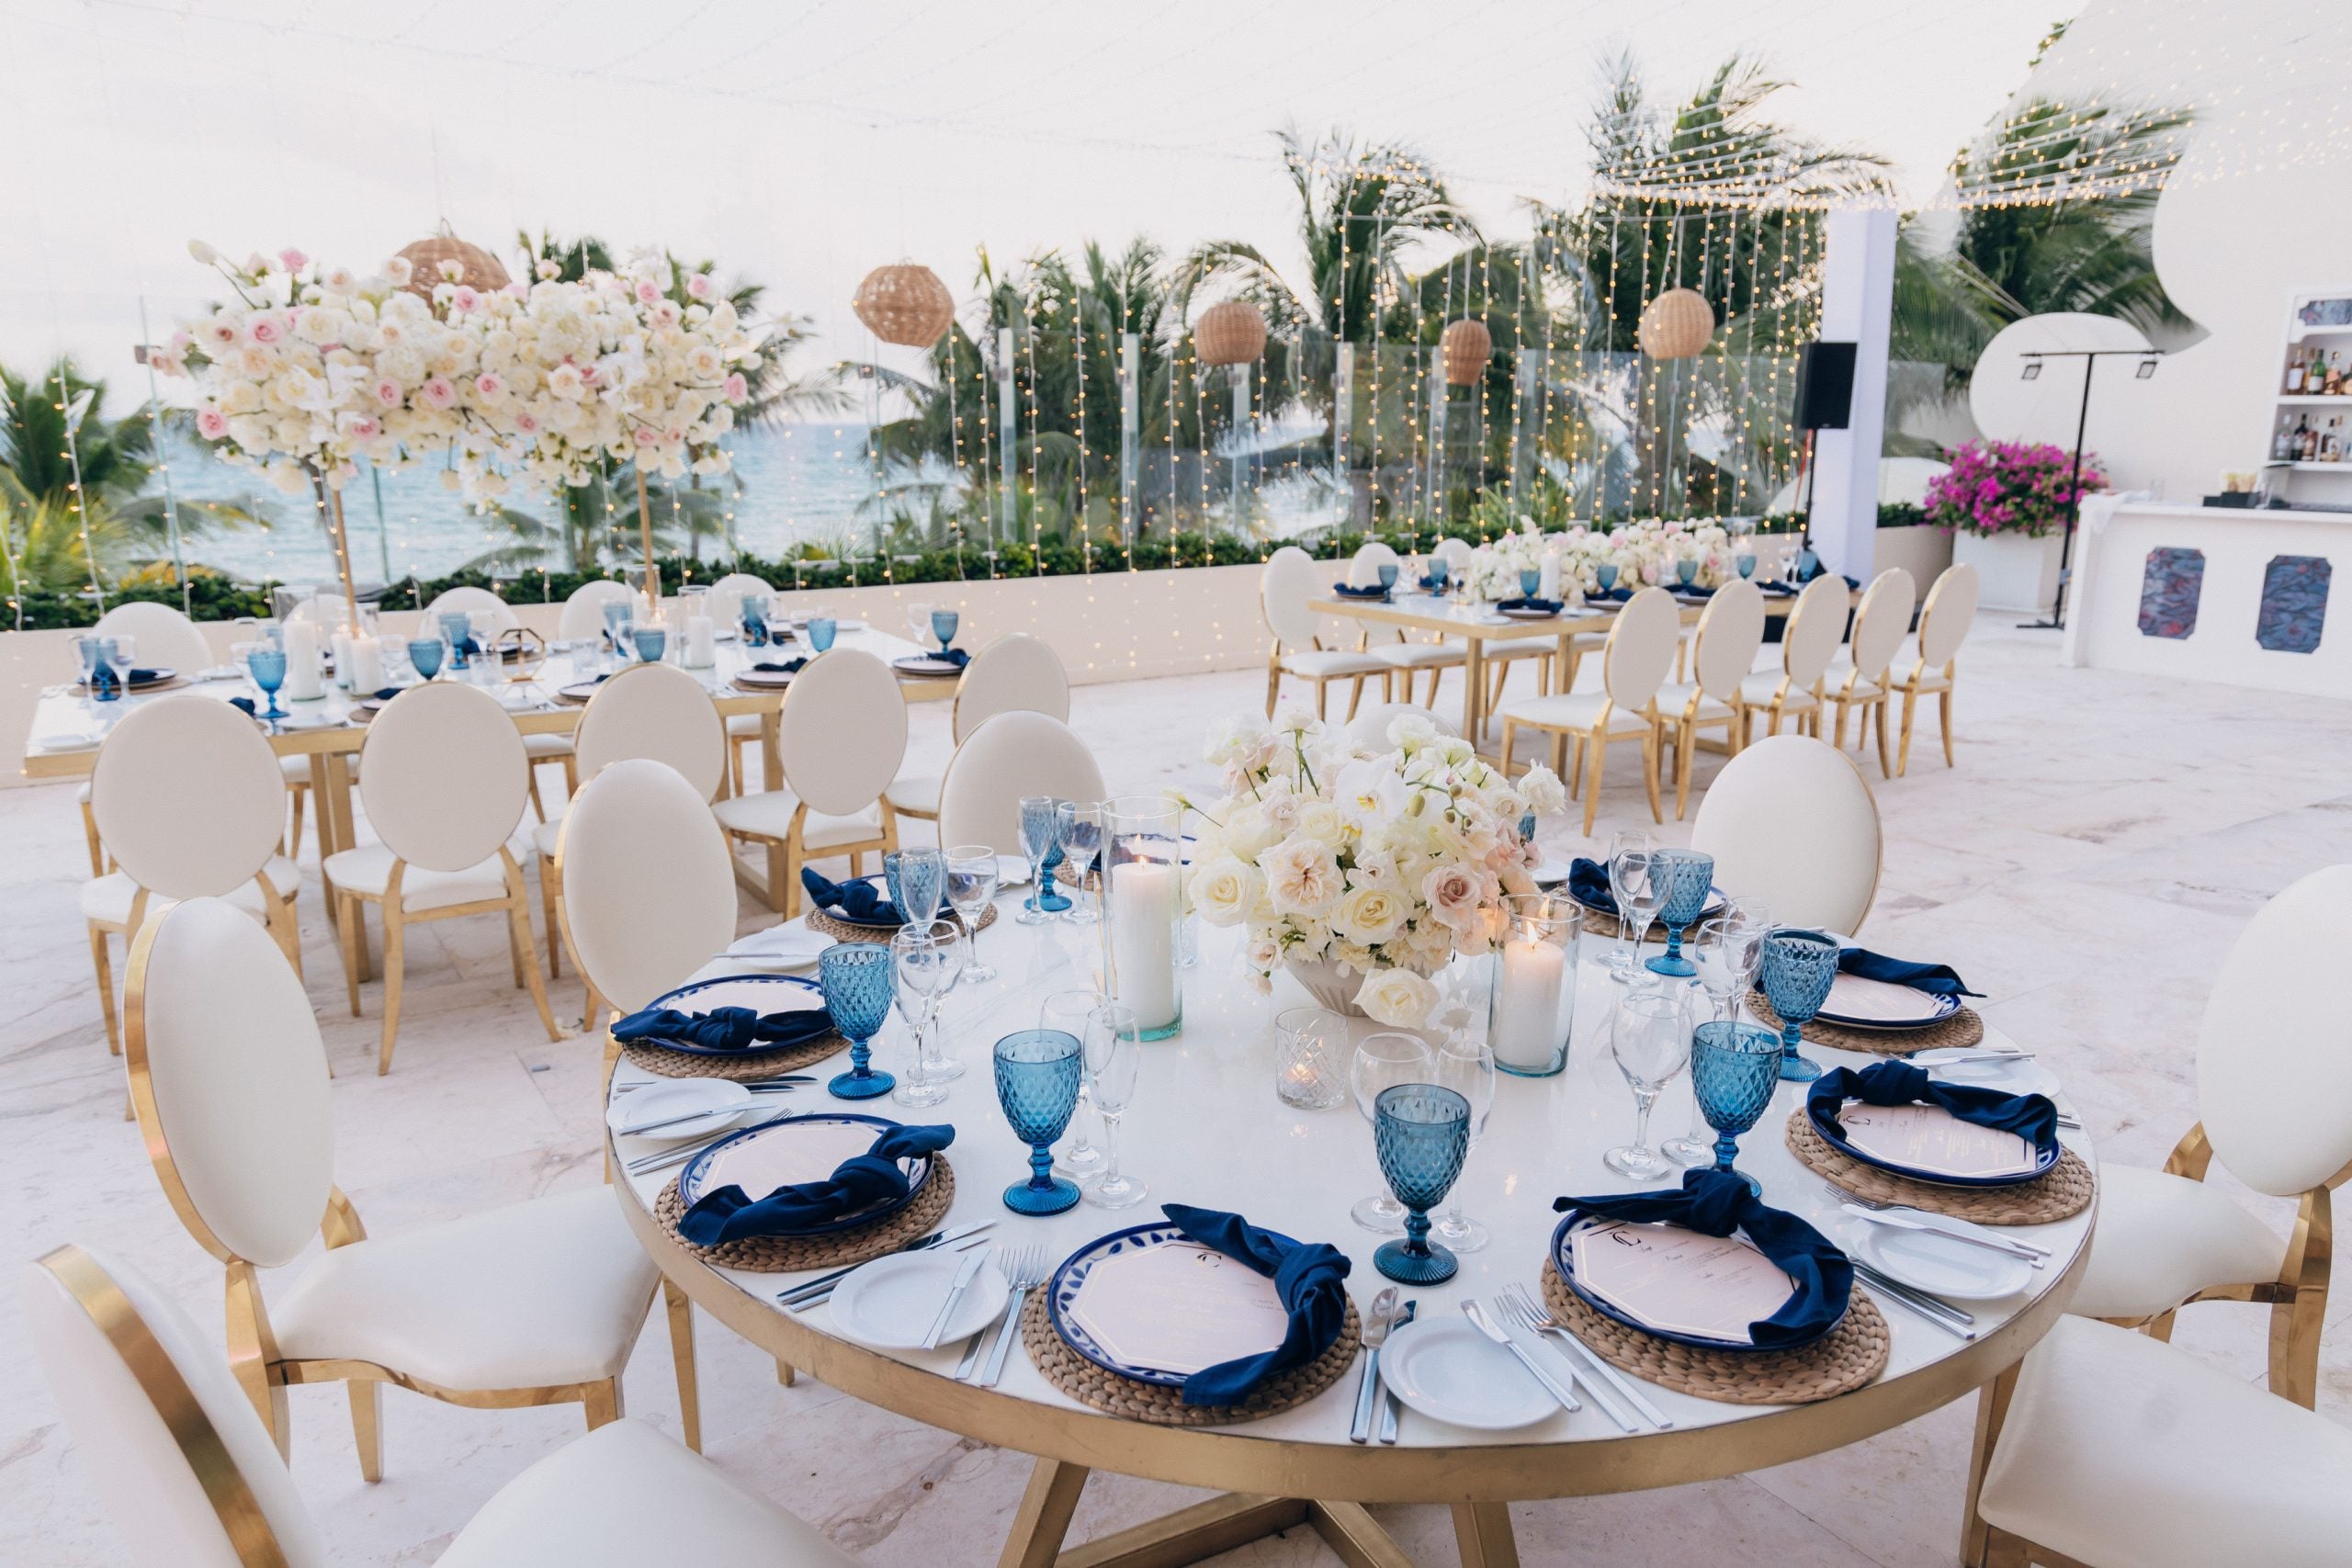 Bridal Bliss: Lori And Che’s Destination Wedding In Playa Del Carmen Was A Lavish Celebration And Vacation In One